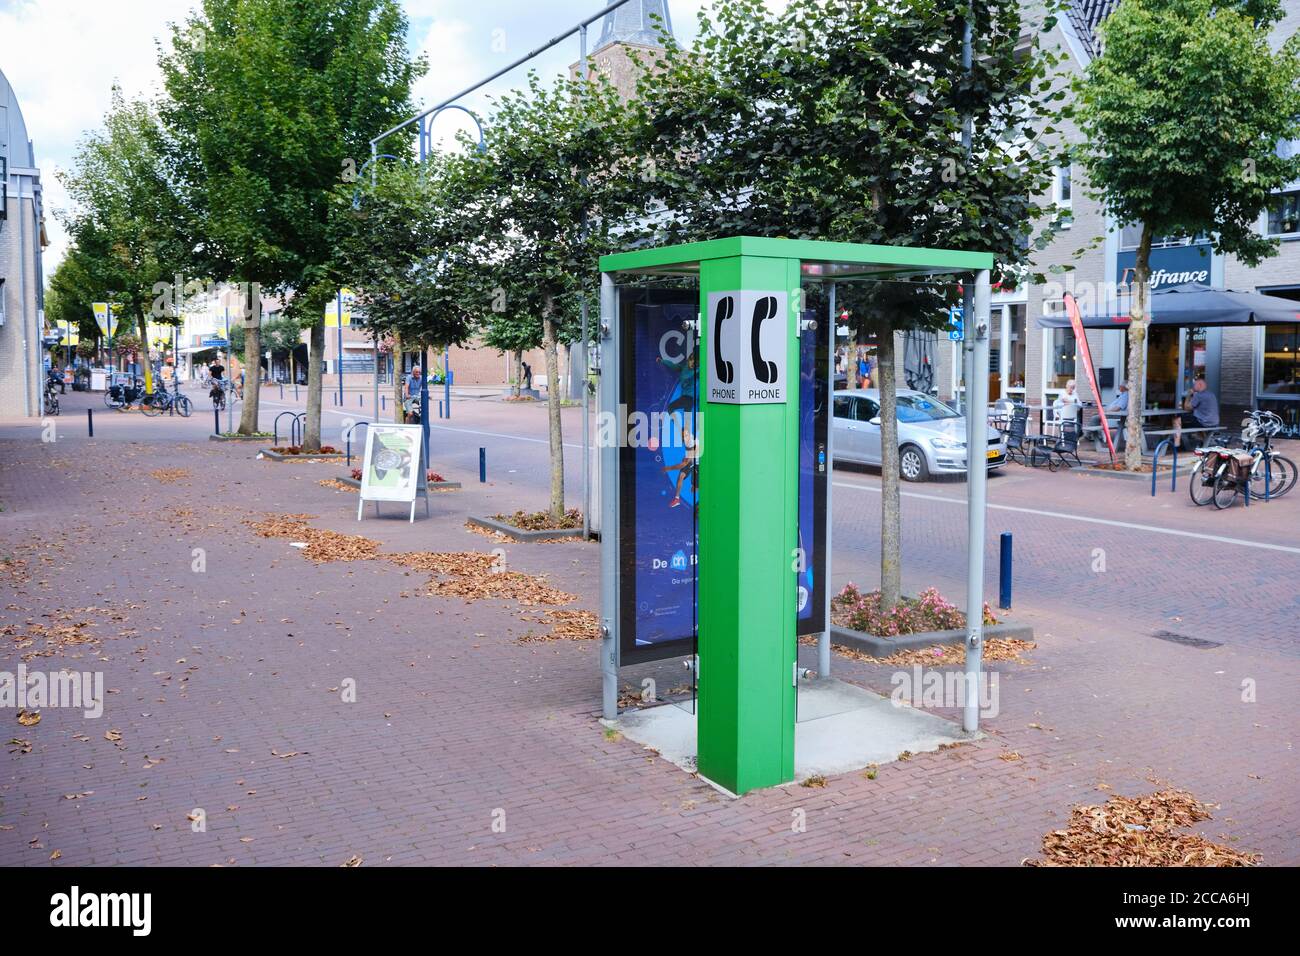 Bennekom, Netherlands. Aug,18,2020. Old Green Phone booth in shopping district, one of the last. Green pay phone for general usage, disappear from the Stock Photo